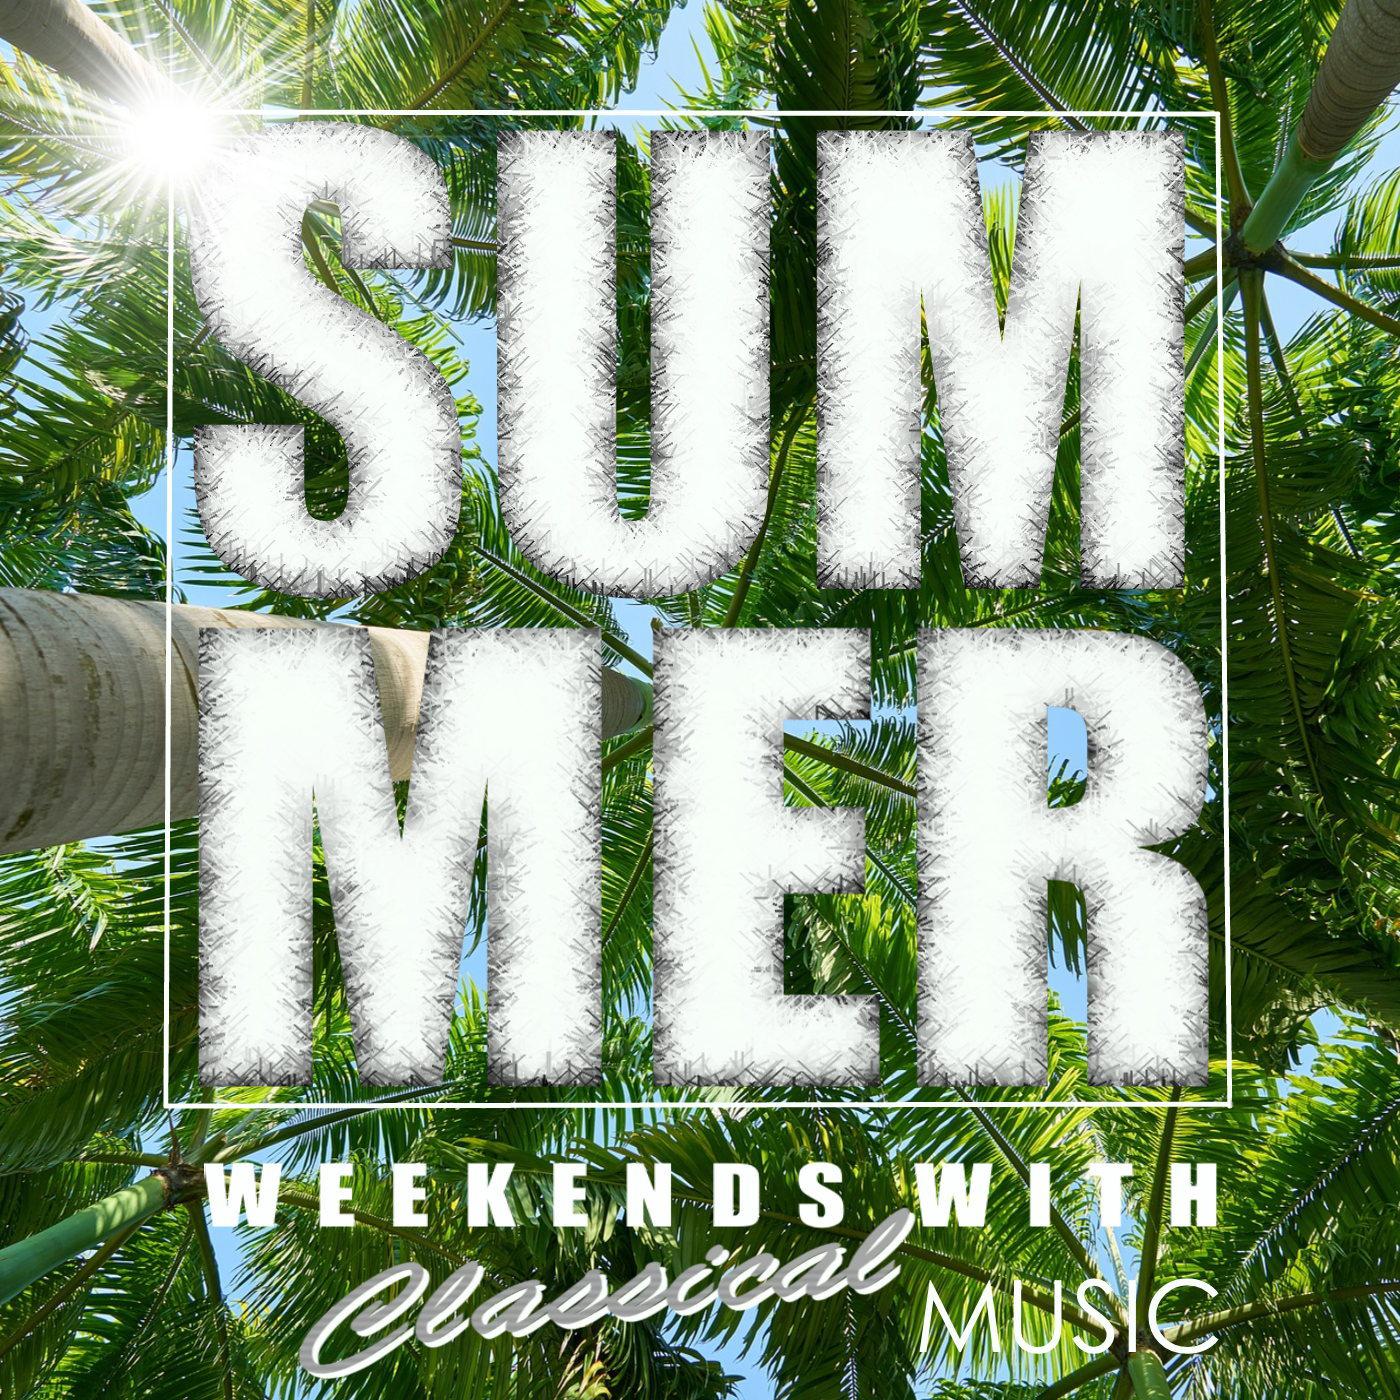 Summer Weekends With Classical Music